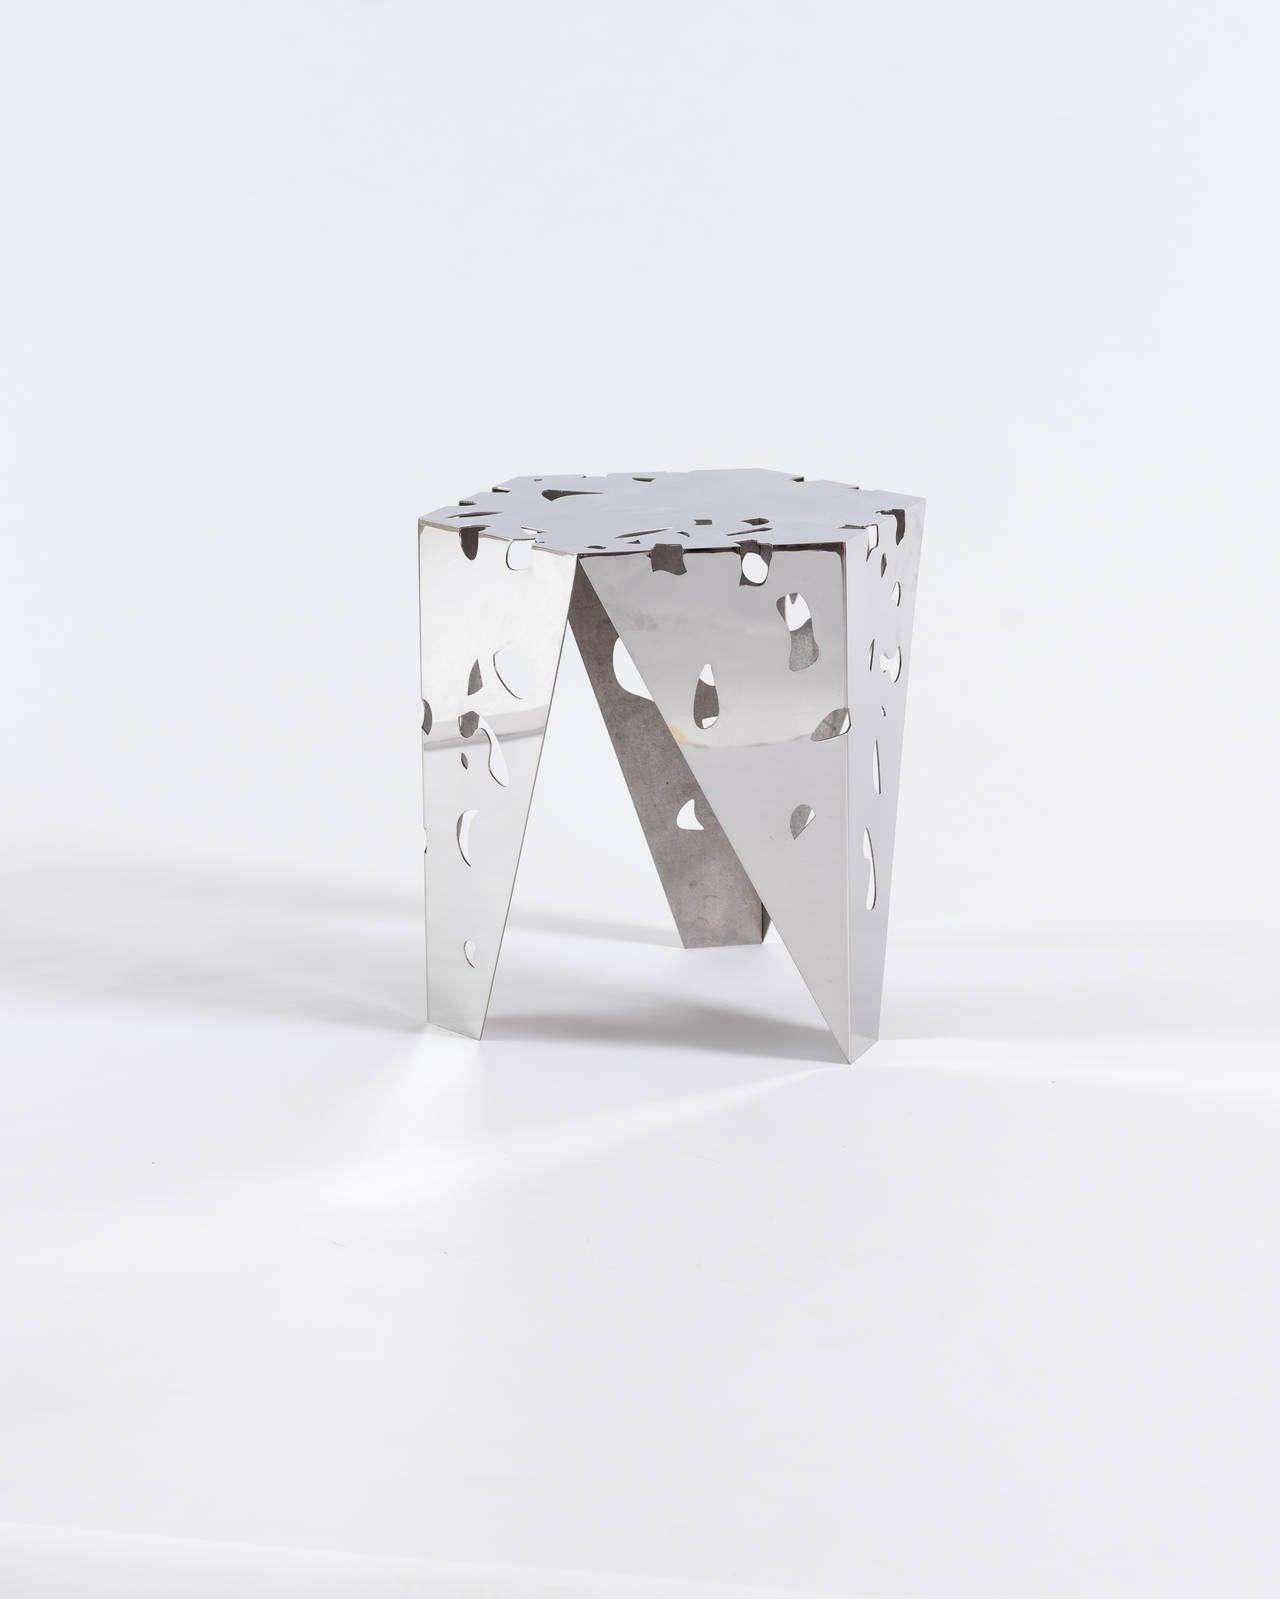 The FDA stool is made of stainless steel and comes with six colors: White, black, mirror, copper, grey, and gold. They are designed by Aranda and Lasch and American artist Matthew Ritchie, from their on-going collaborated project.